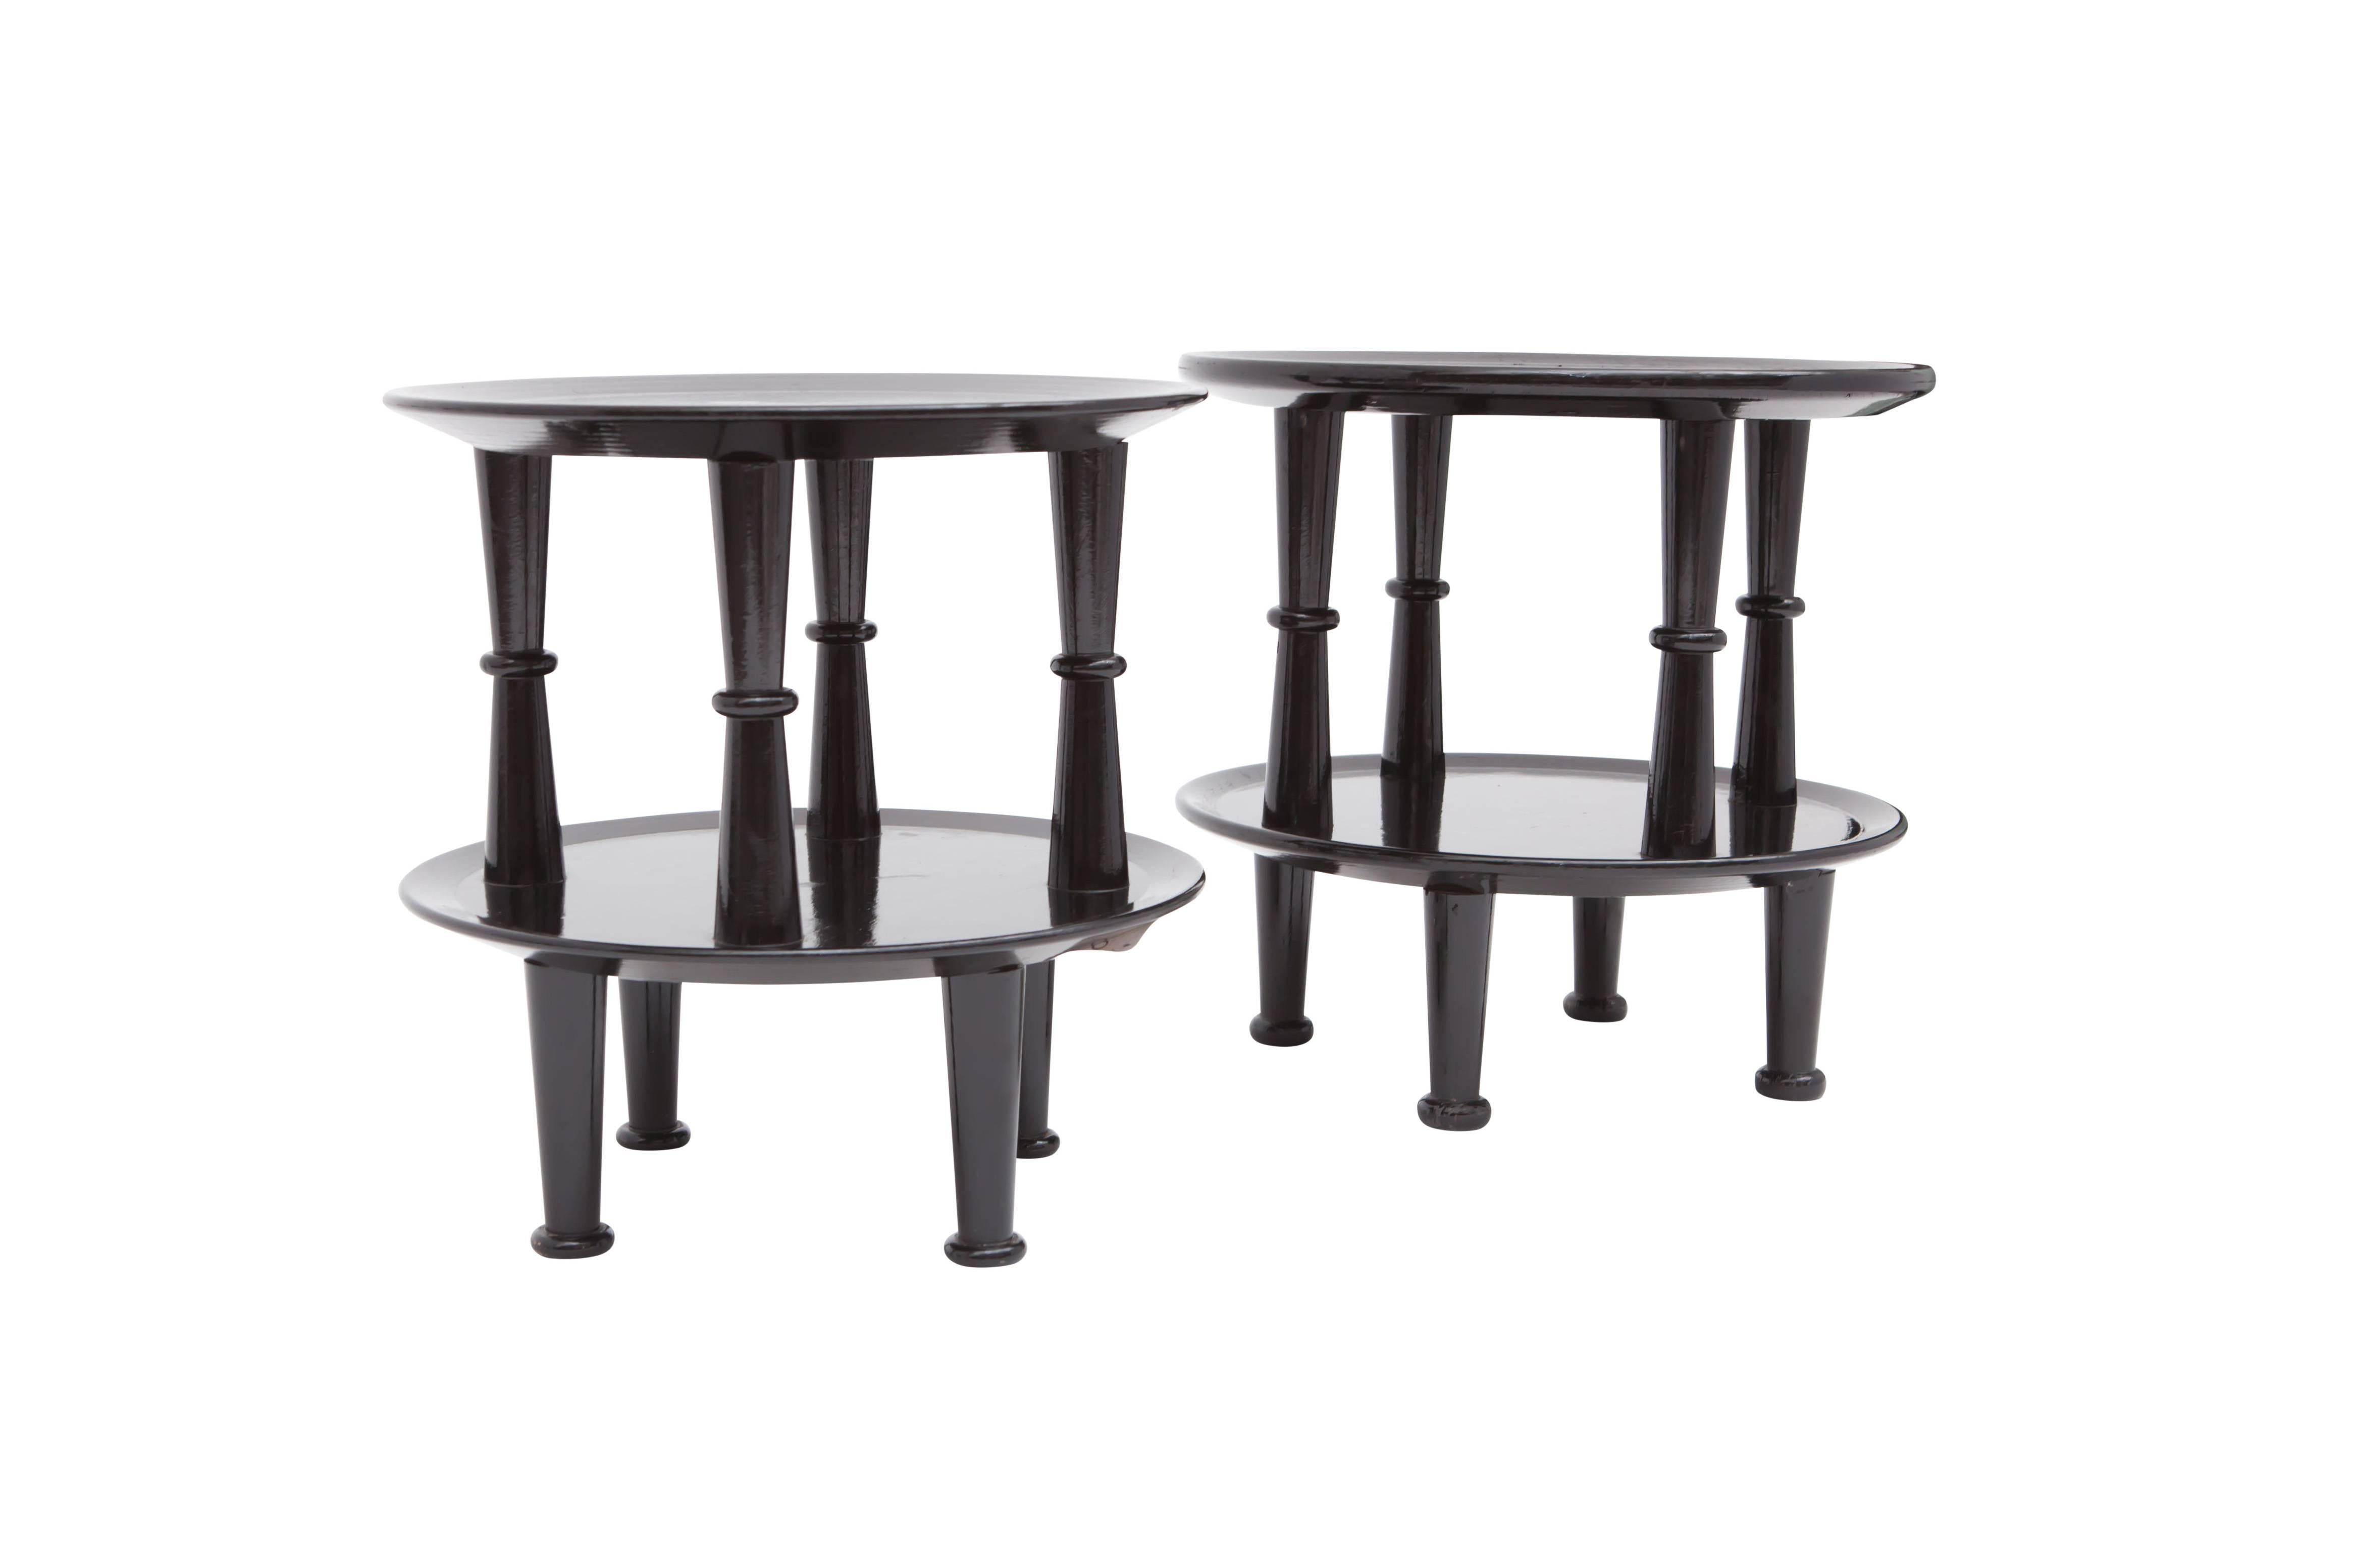 Hollywood regency style  decorative and chic side tables.
Black lacquered frame.
Italy, 1950s
The side tables are not a identical copy of each other
which adds even more character and uniqueness.
H 43 cm Ø 43 cm

this is not a set of four, but a set